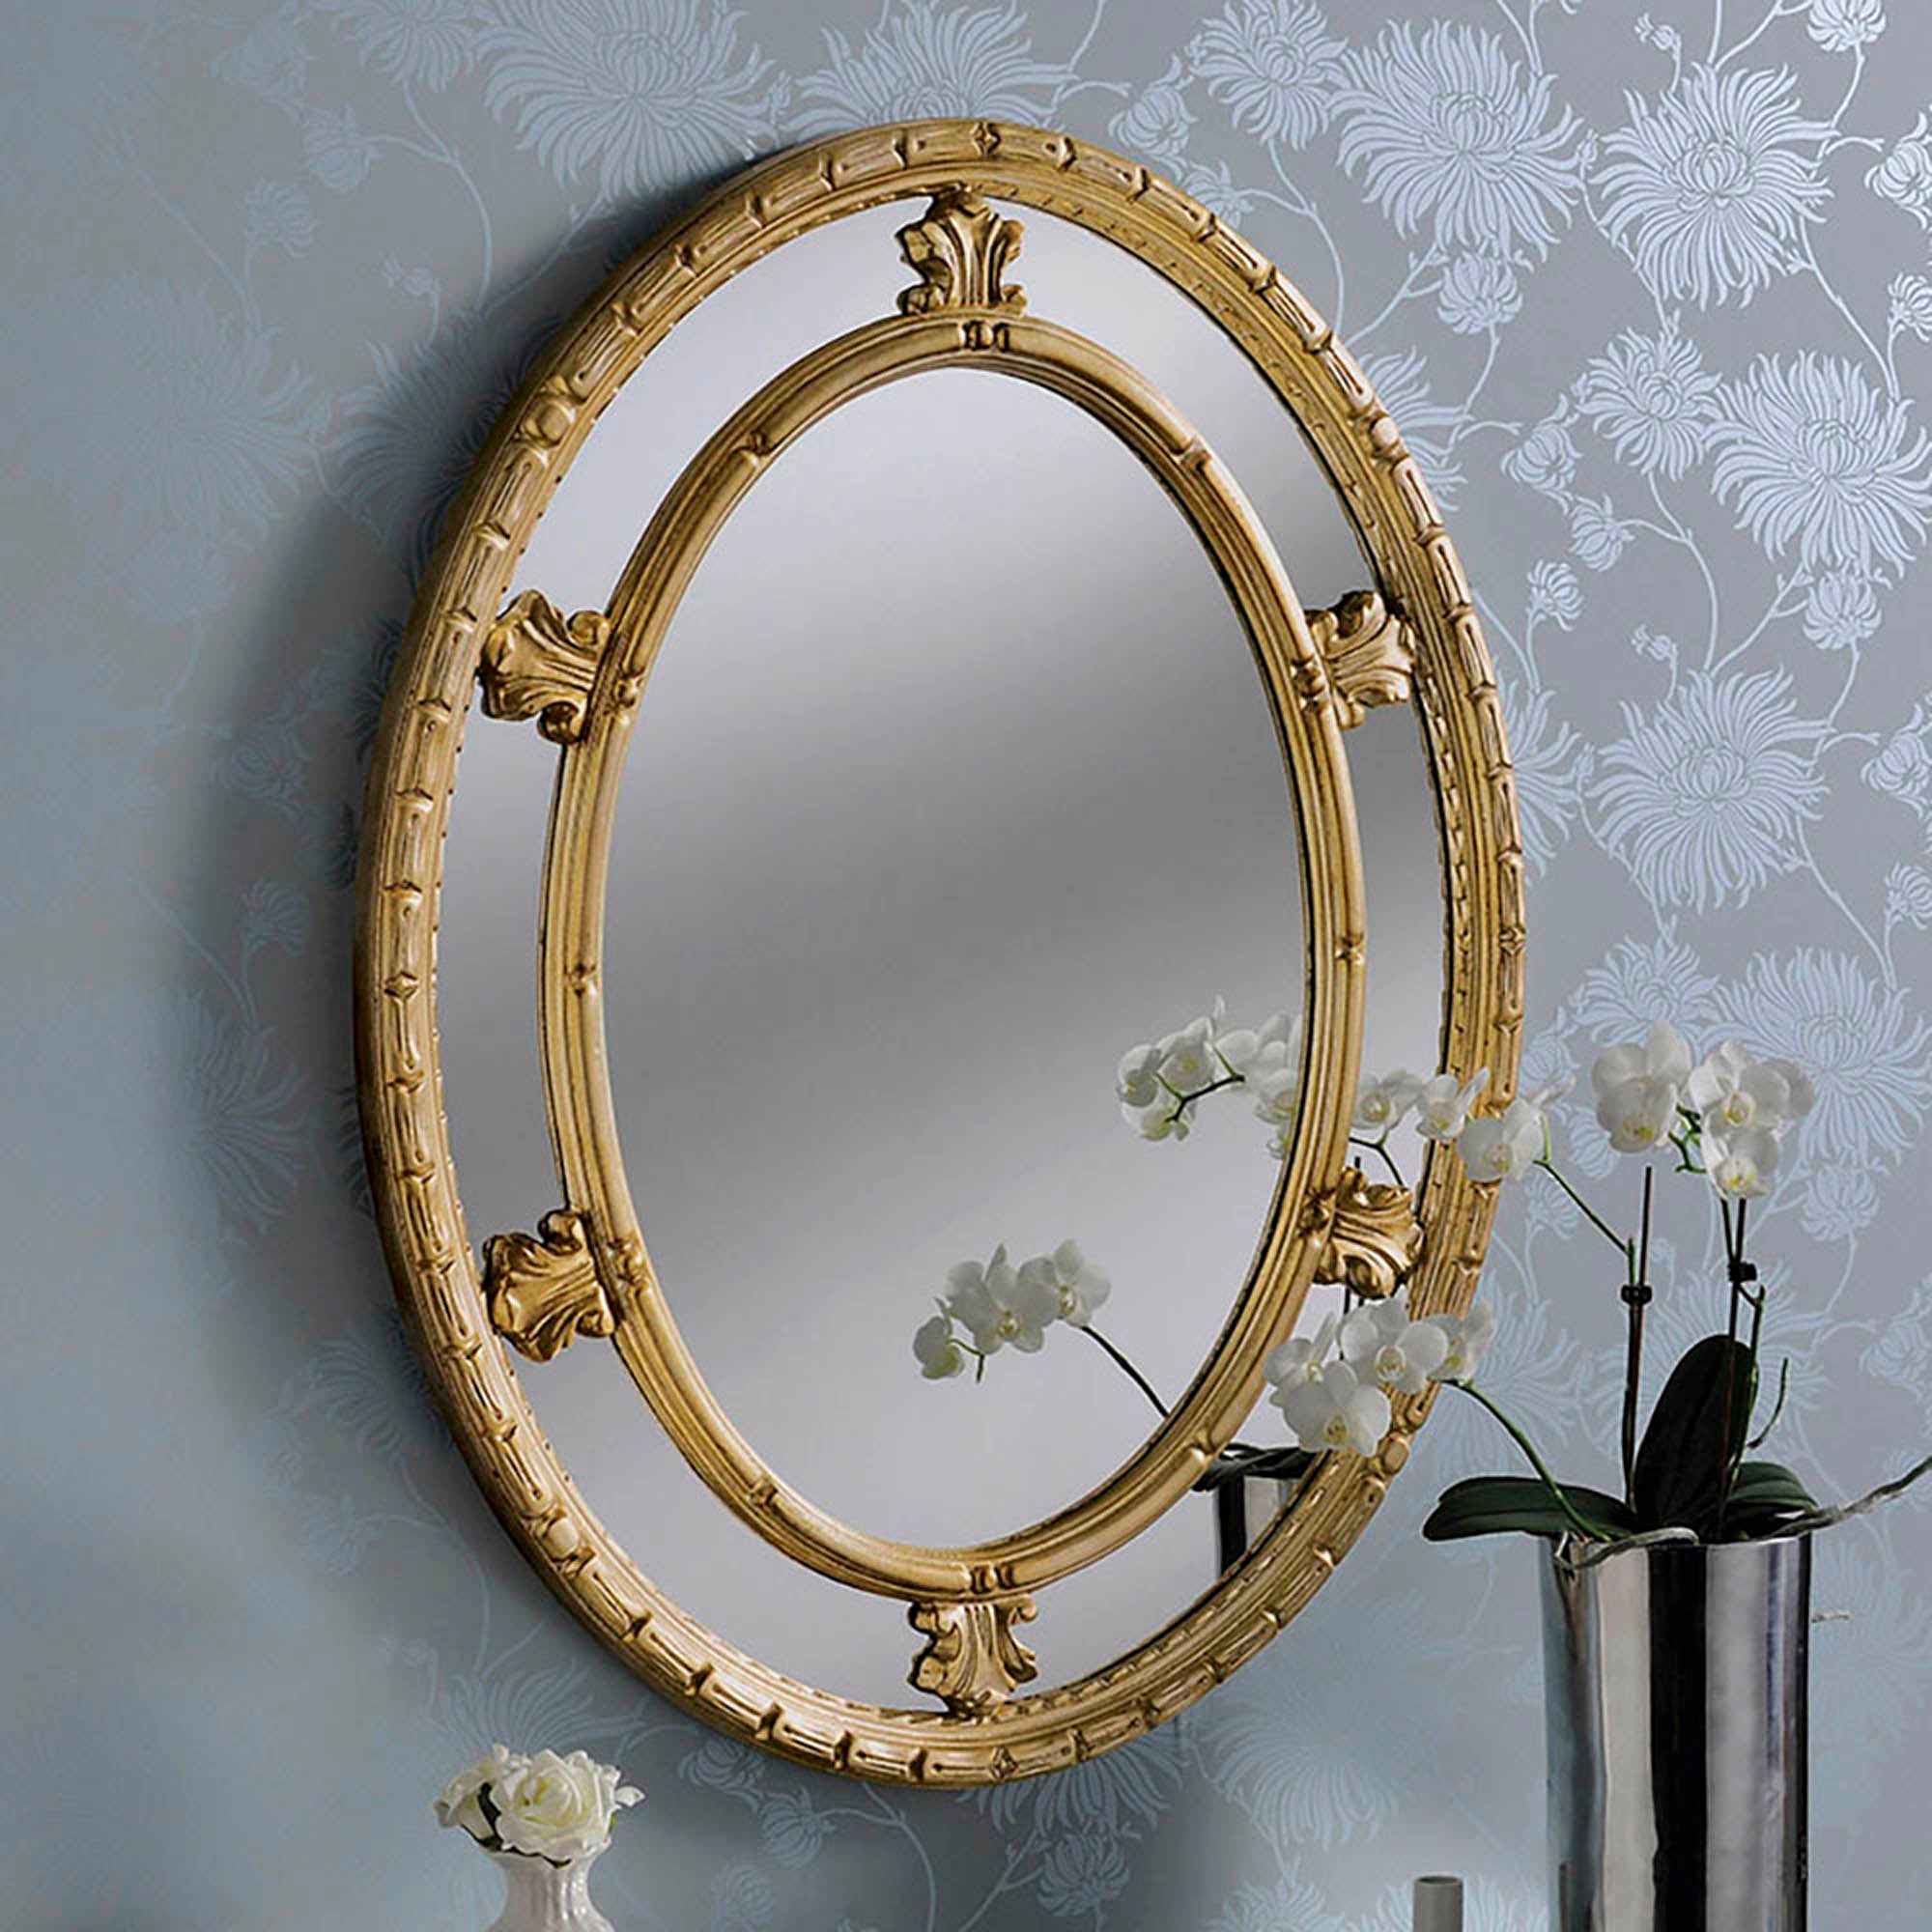 Yearn Decorative Oval Mirror Gold Effect Effect 86x66cm Gold